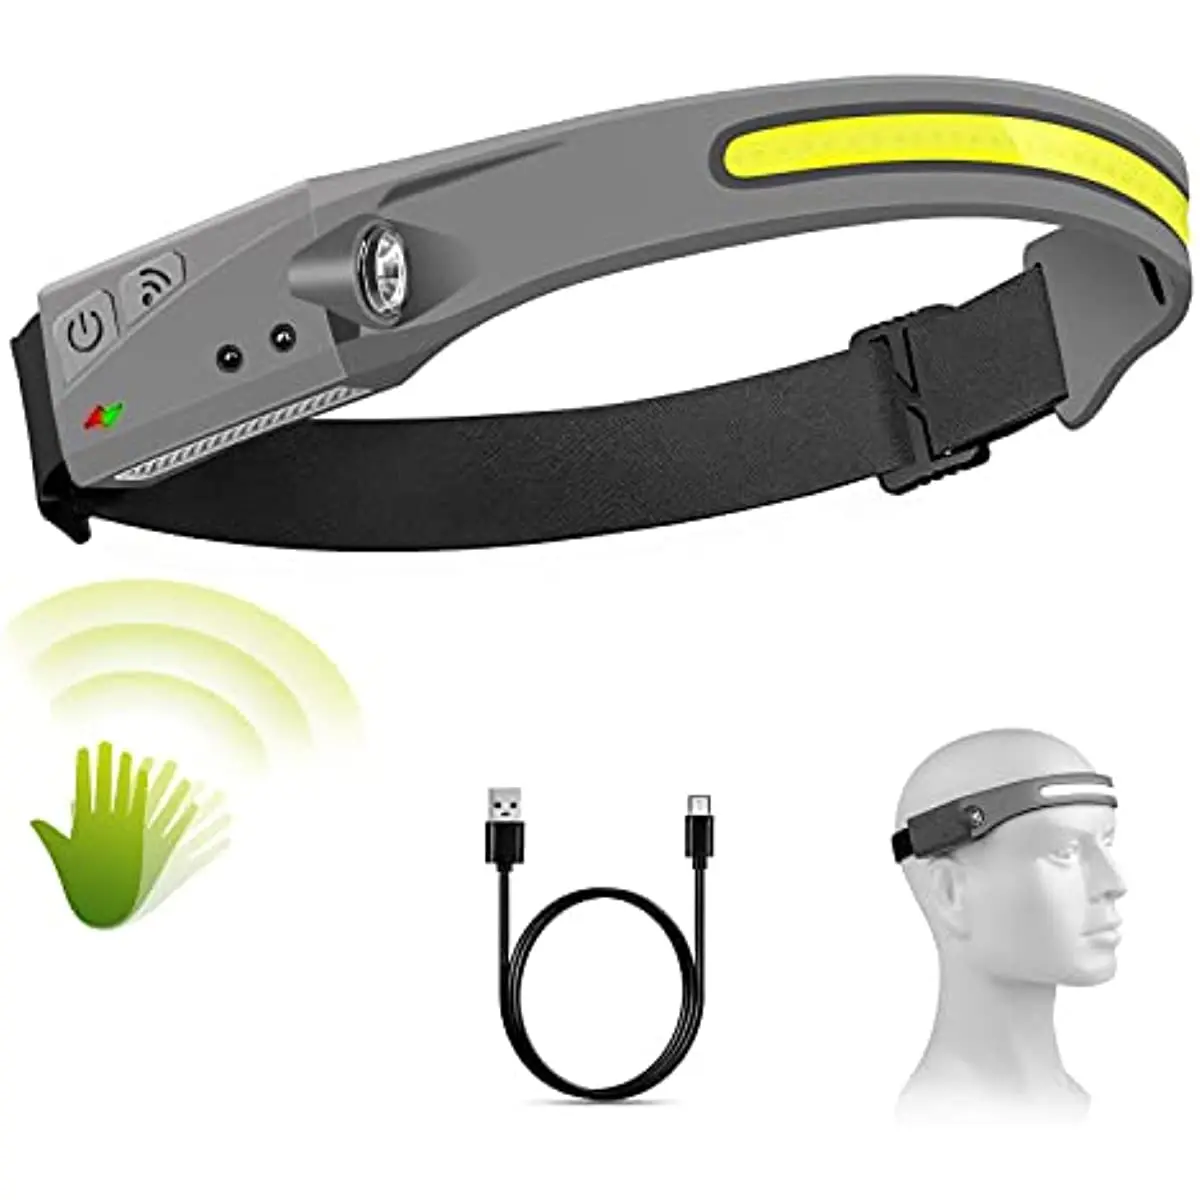 LED Headlamp Rechargeable Headlamps with 230°Wide Beam Headlight with Motion Sensor Bright 5 Modes Lightweight Sweat